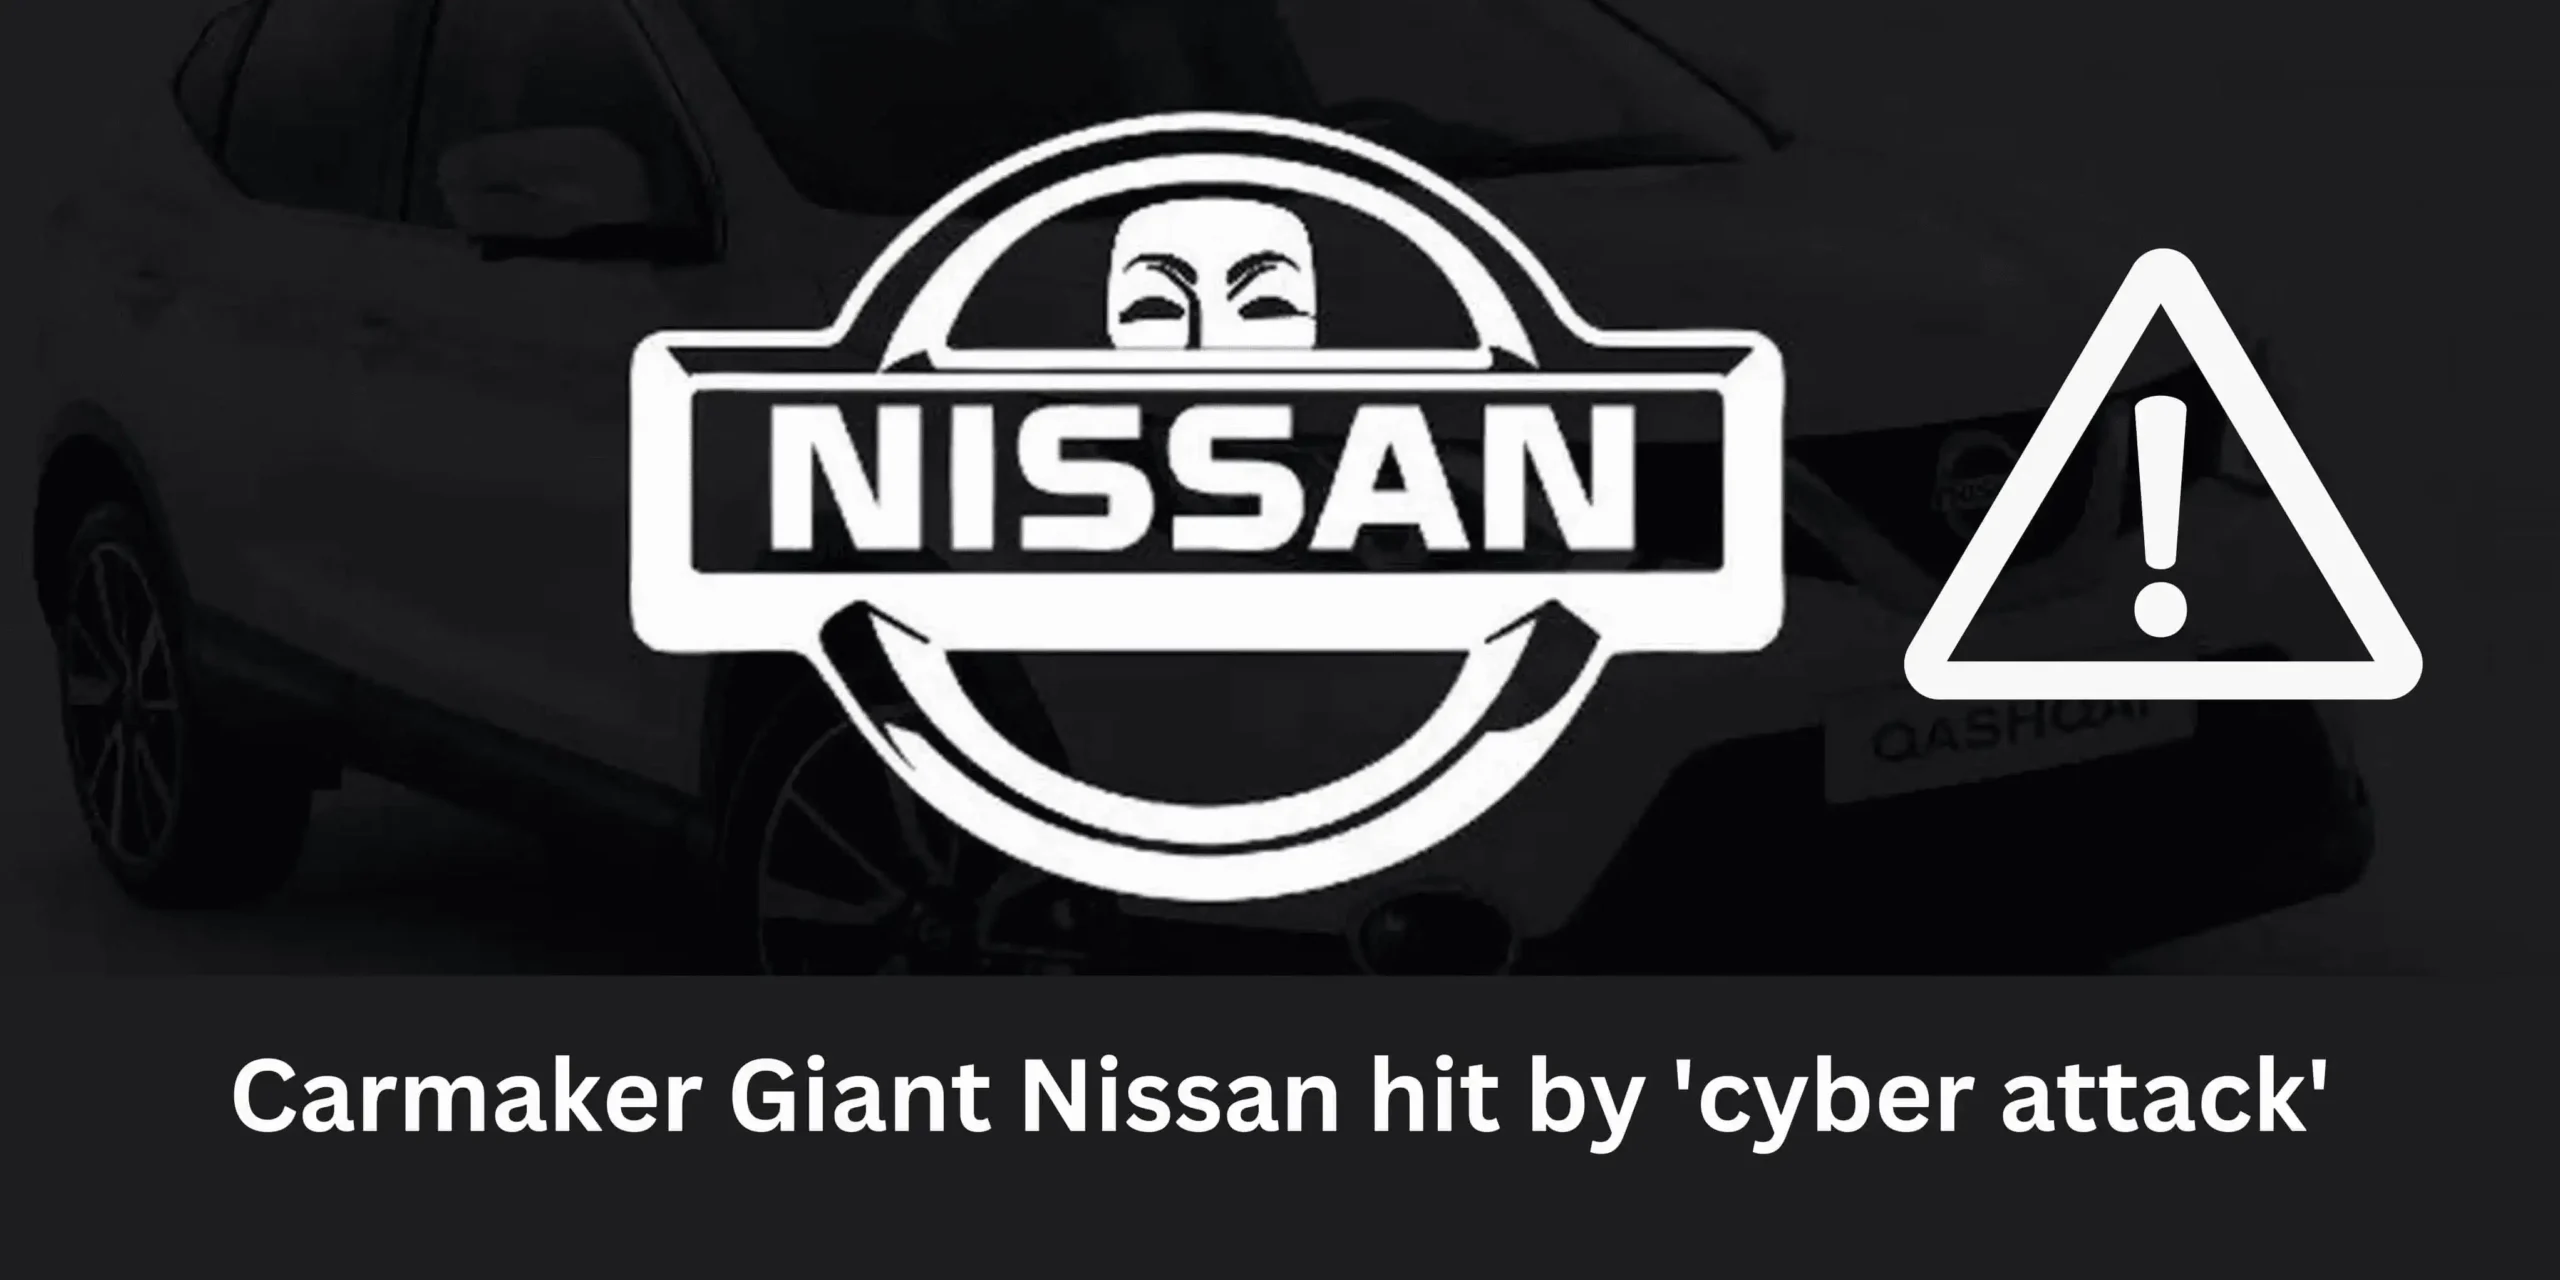 Carmaker Giant Nissan hit by 'cyber attack'